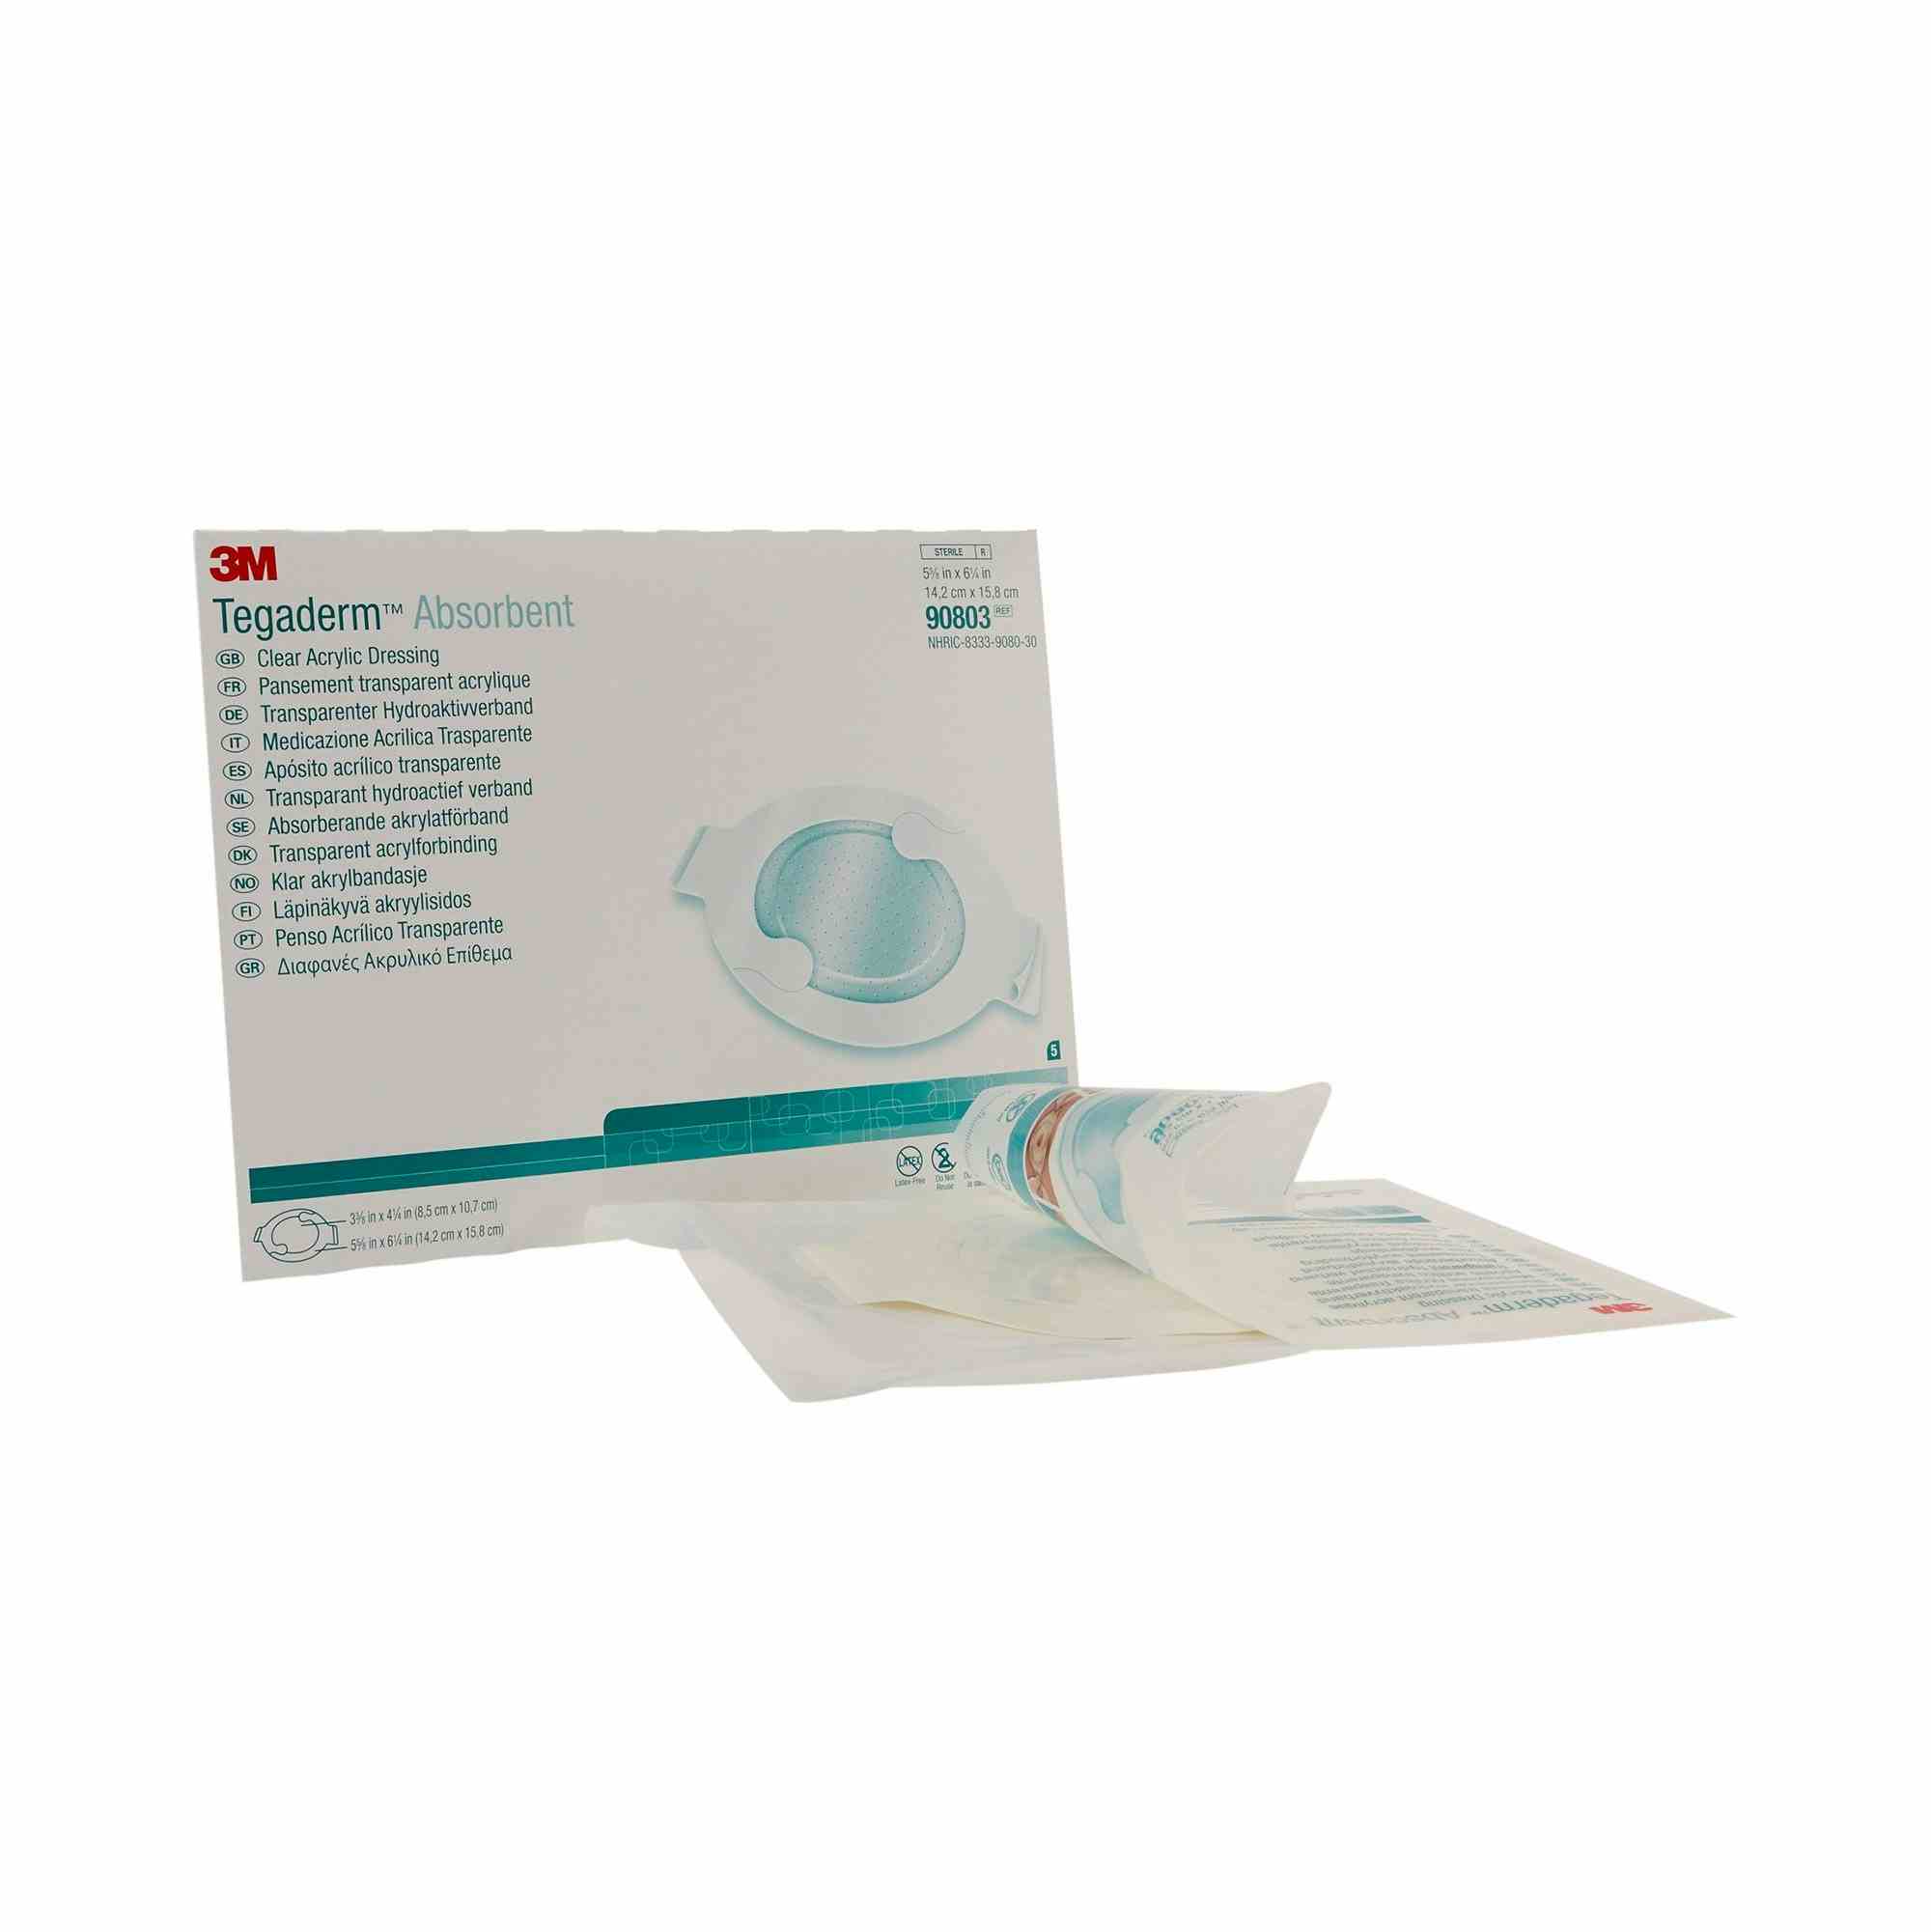 3M Tegaderm Absorbent Clear Acrylic Dressing, 5-5/8 X 6.25", 90803, Box of 5